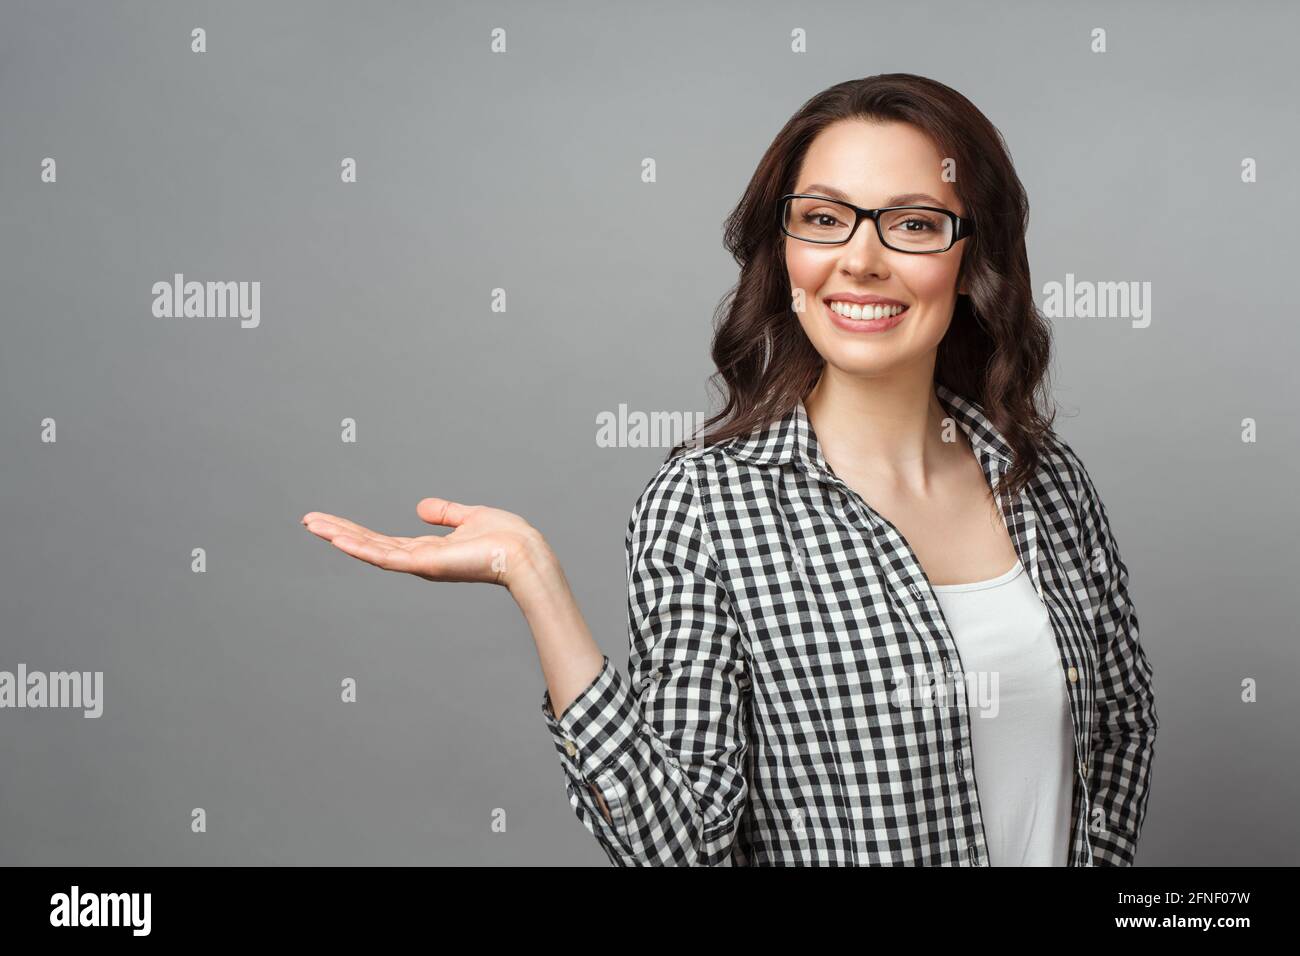 Young woman smiling and gesturing to copy space. Stock Photo